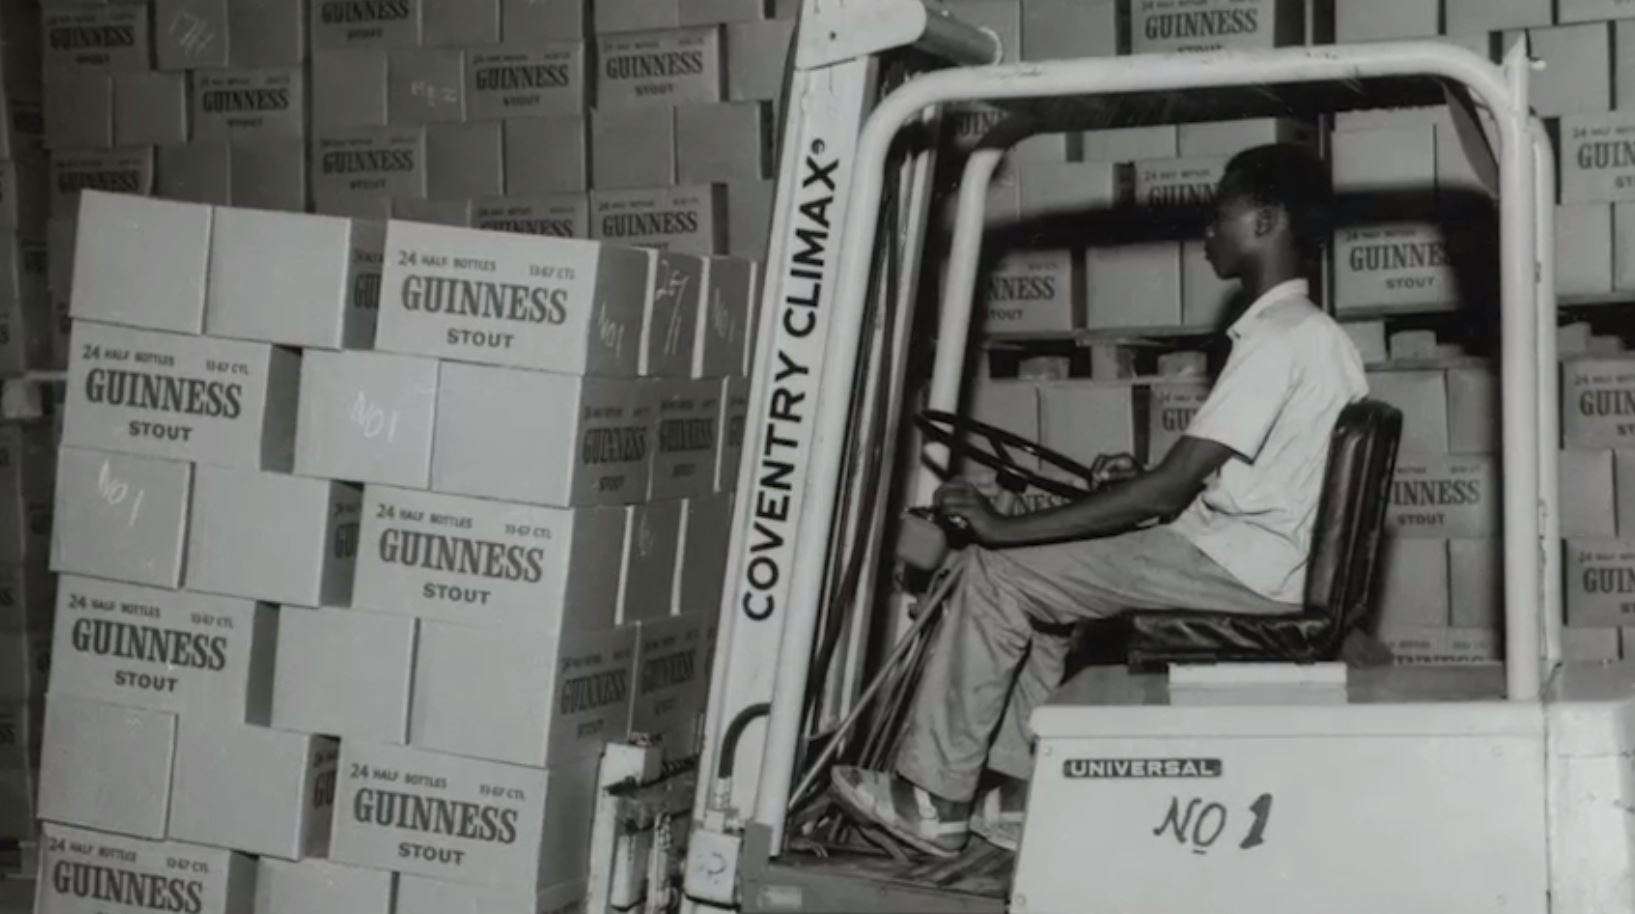 Guinness Nigeria Plc is home of the first Guinness